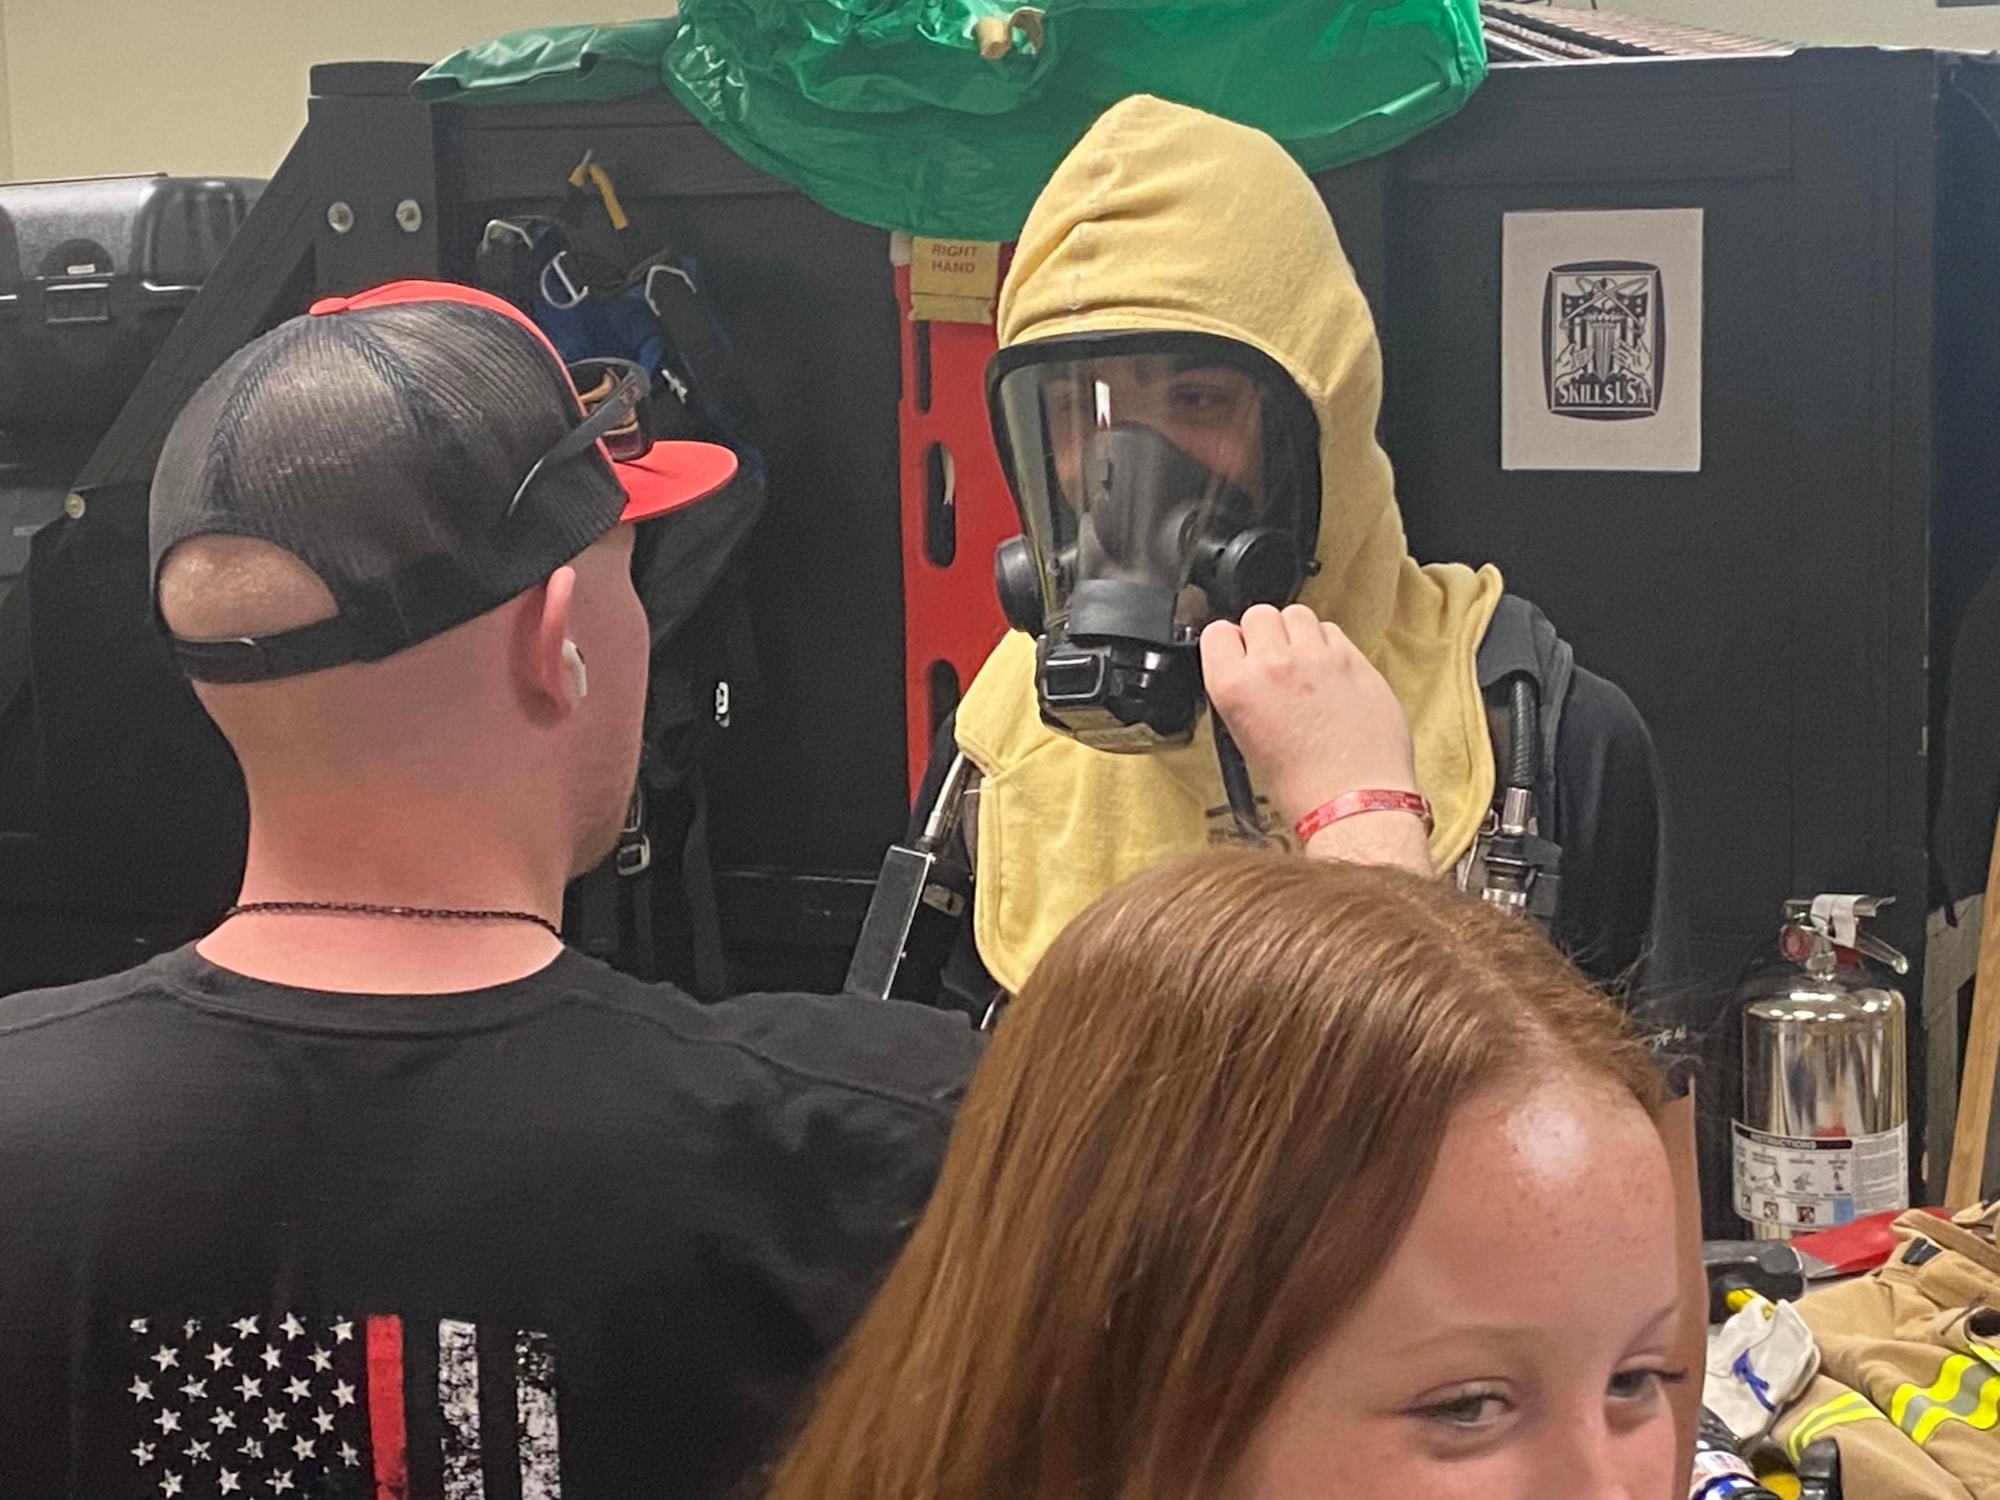 Student tries on Fire gear